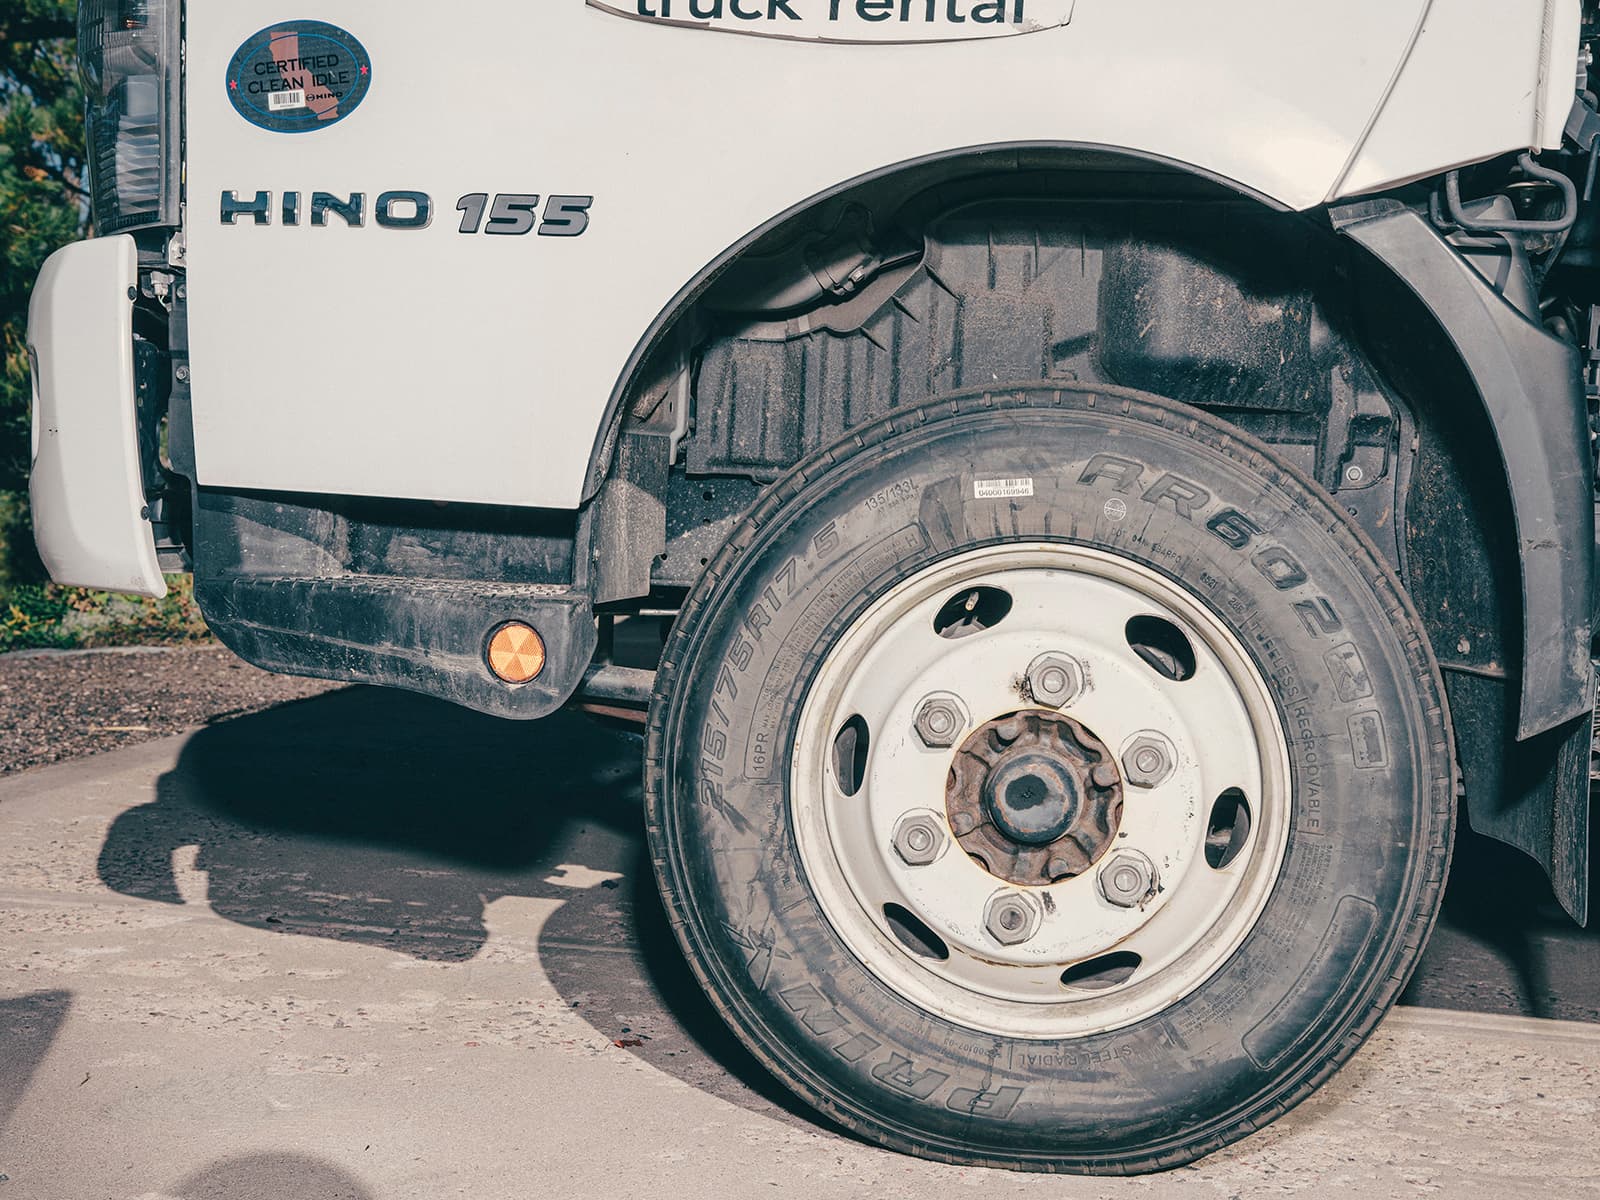 Close-up of the front tire of a white semi-truck